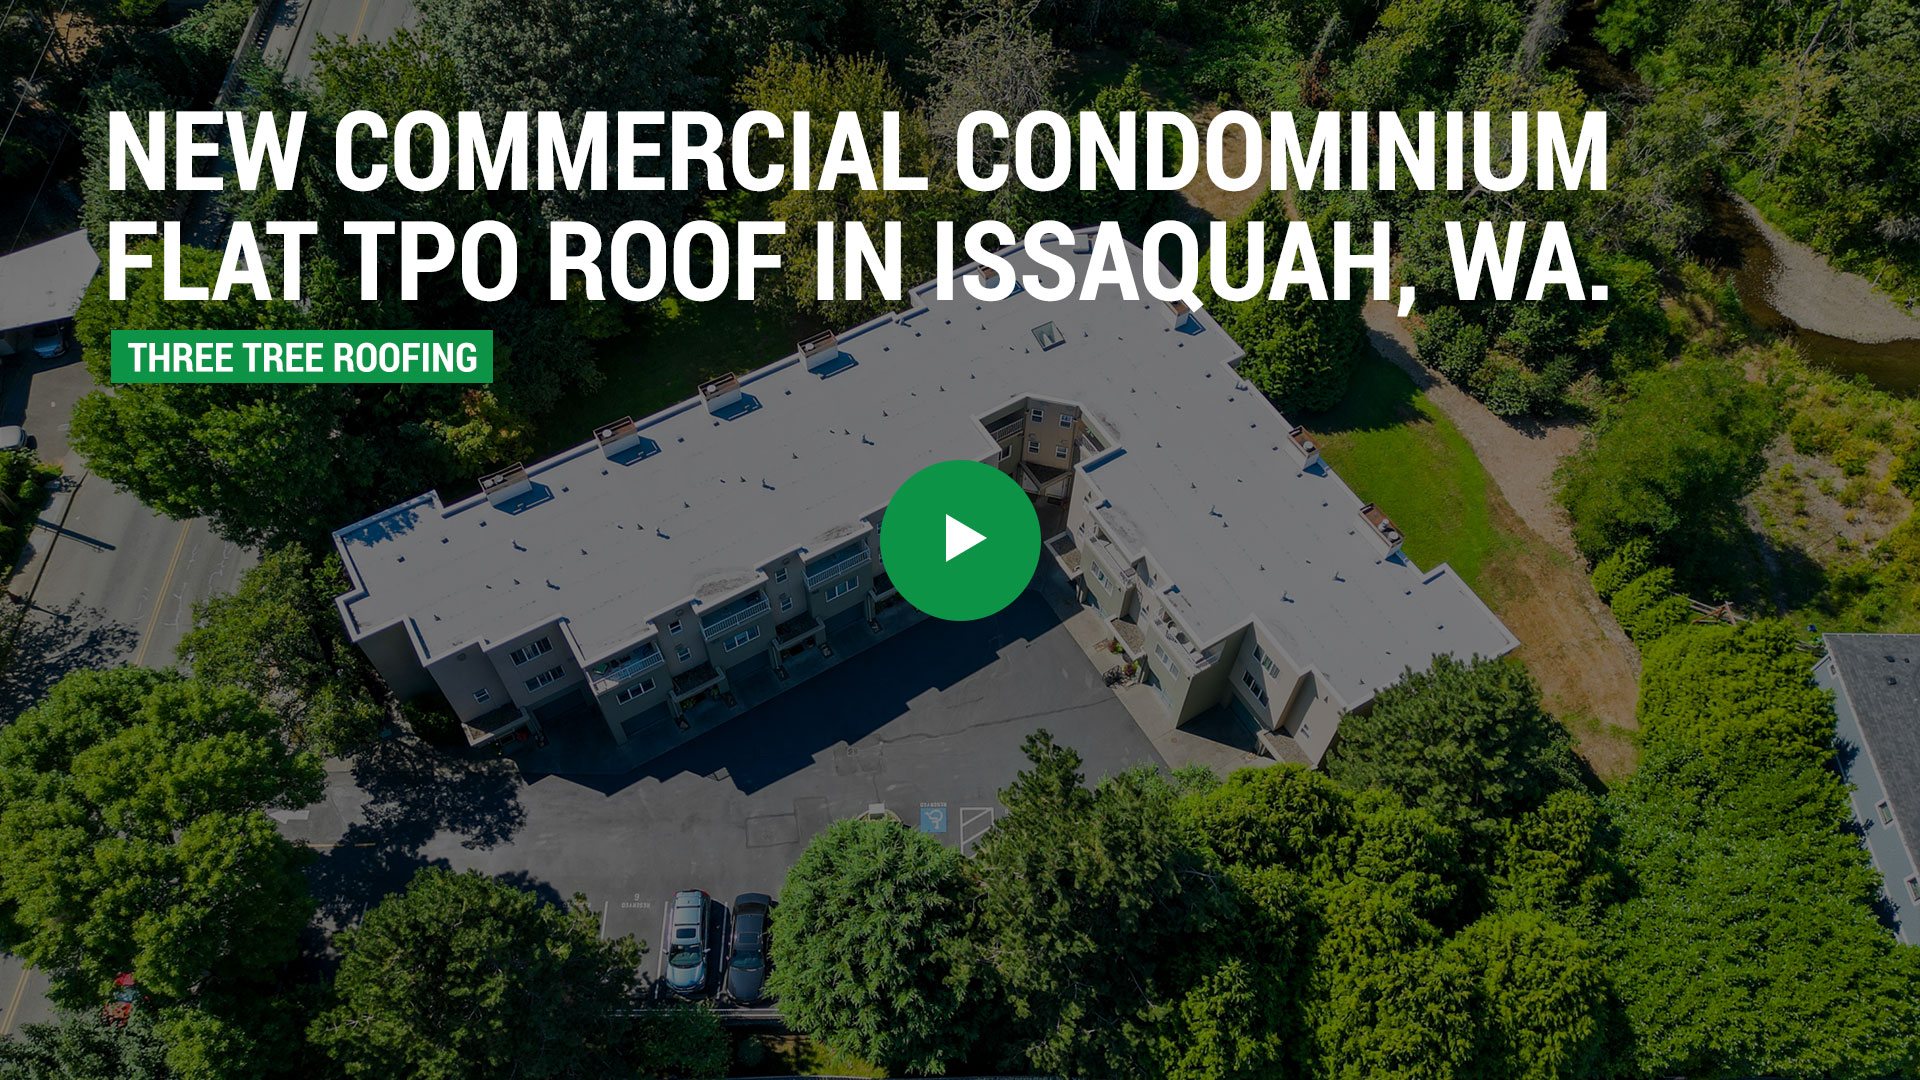 Roofing Project: Commercial Condominium Flat TPO Roof in Issaquah, Washington - Roofing Video